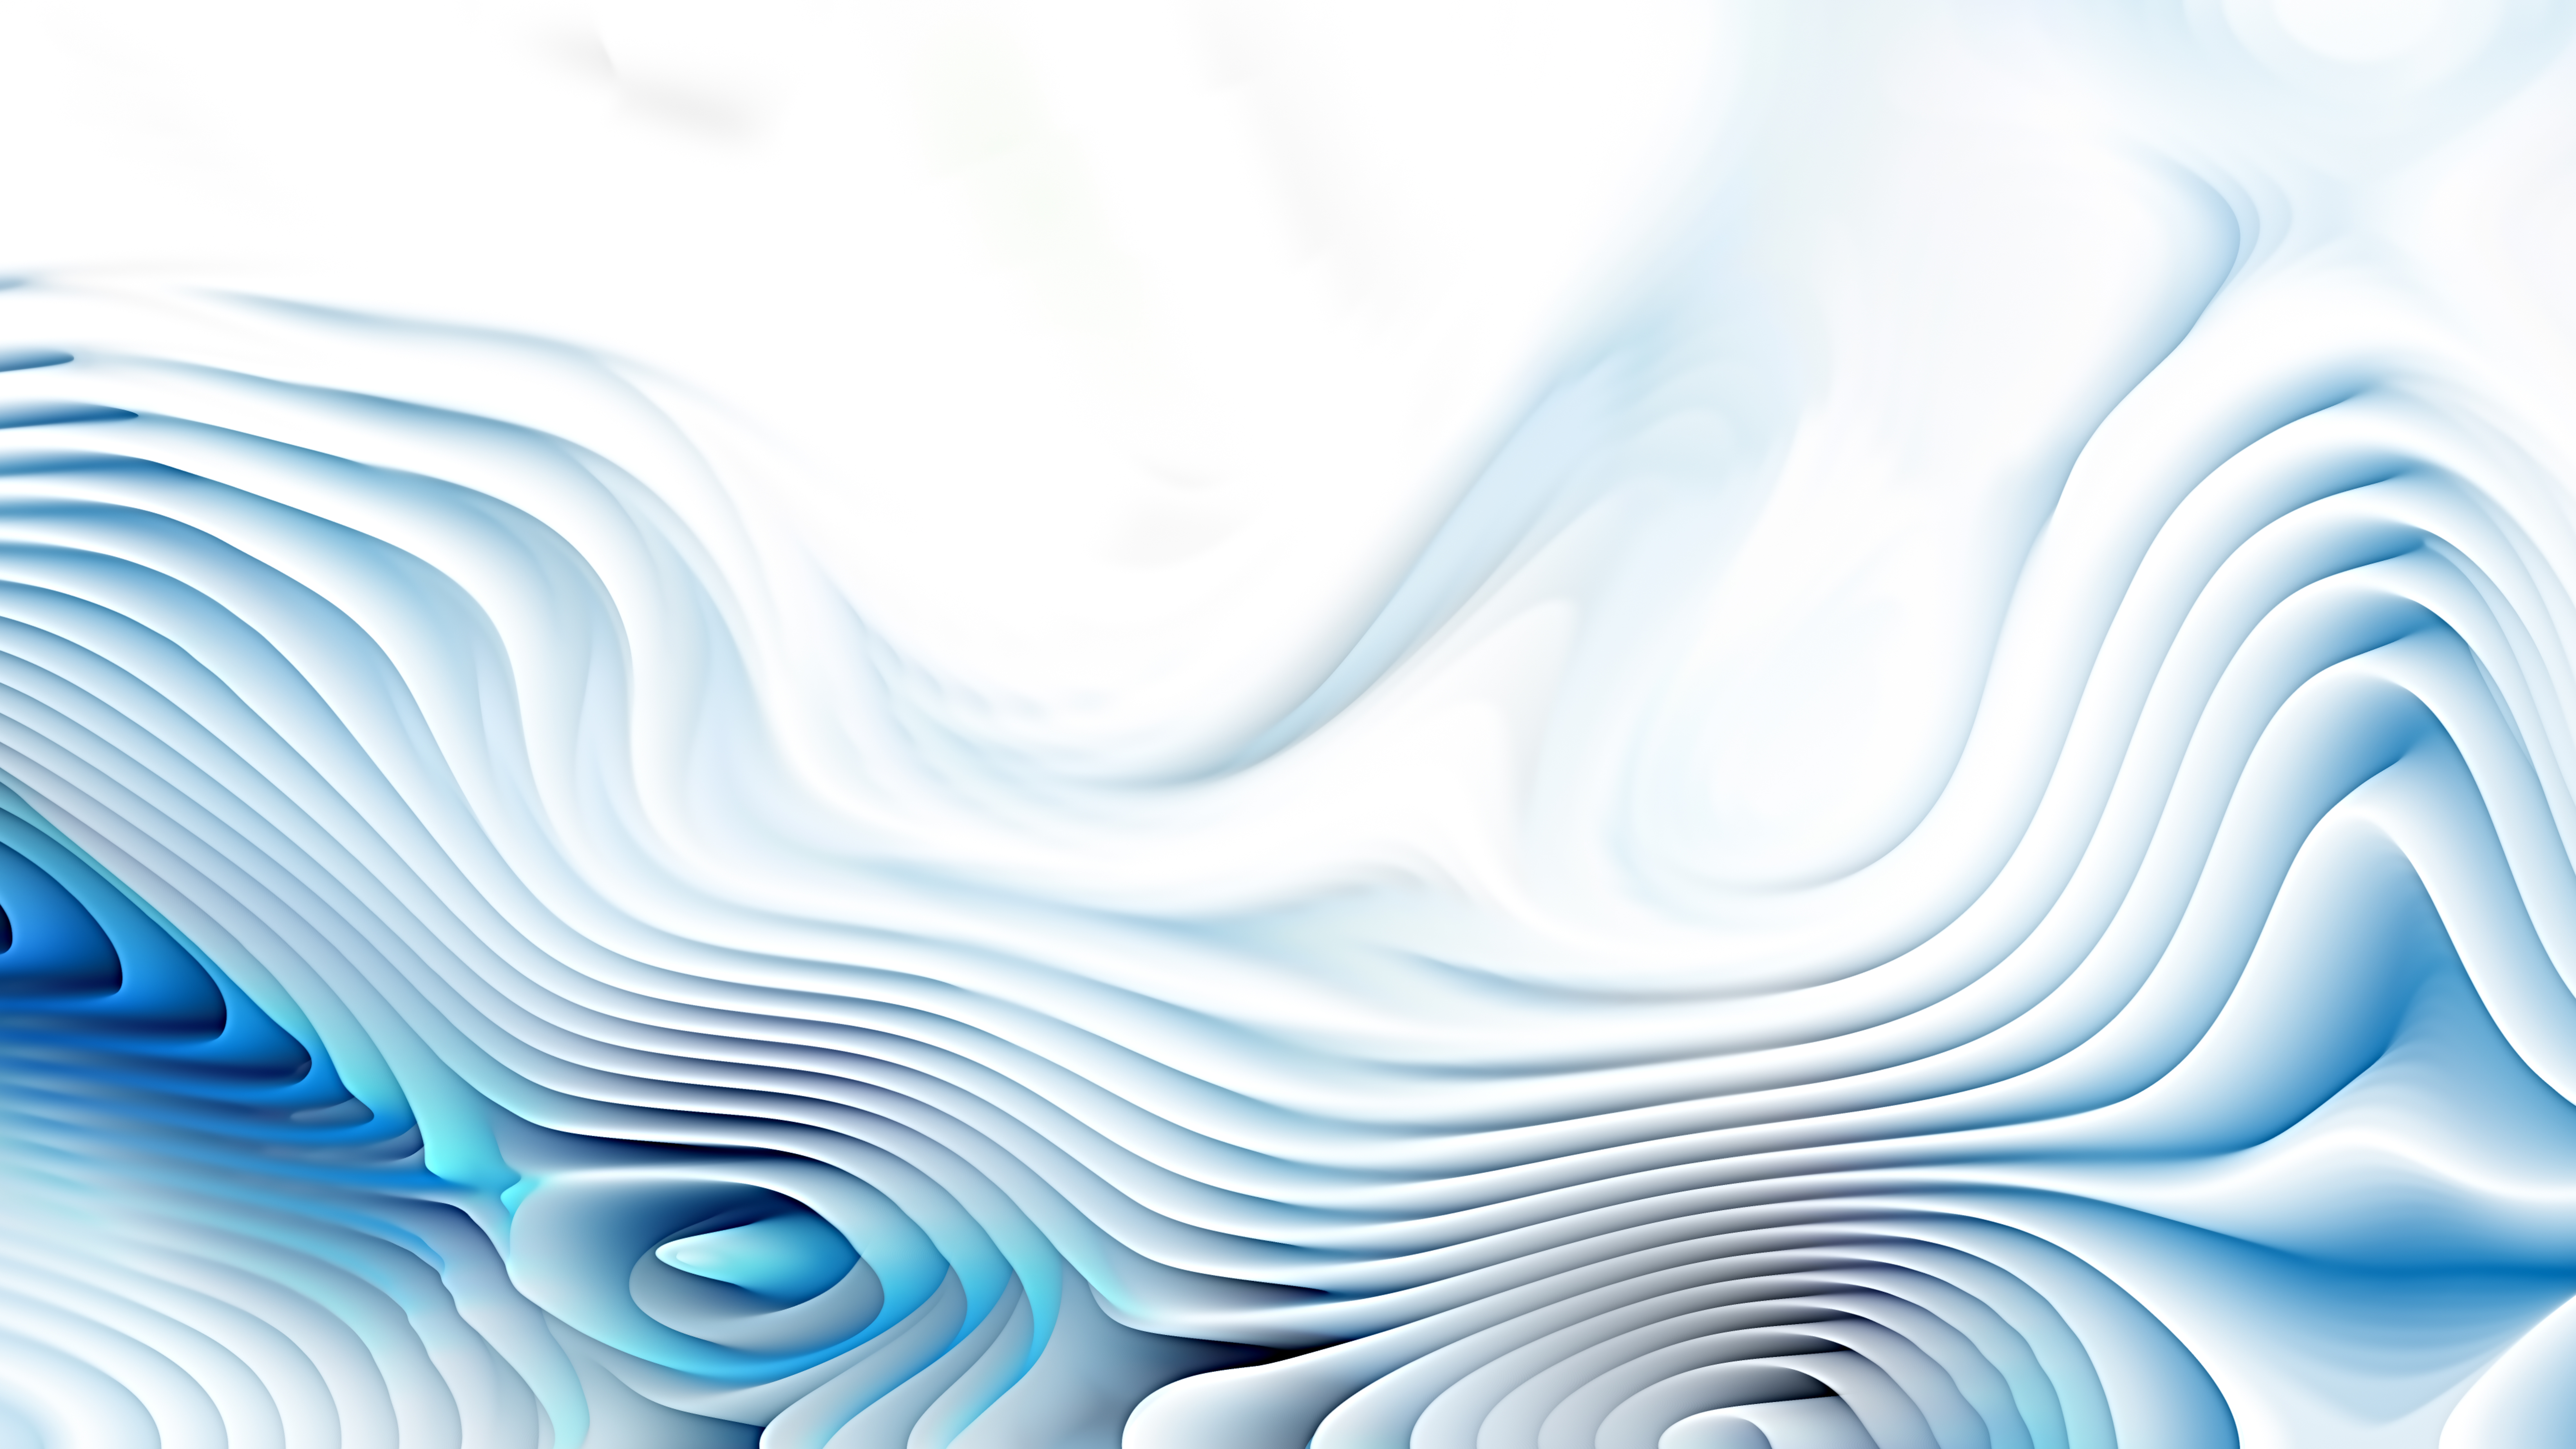 Free Blue and White 3d Abstract Curved Lines Background